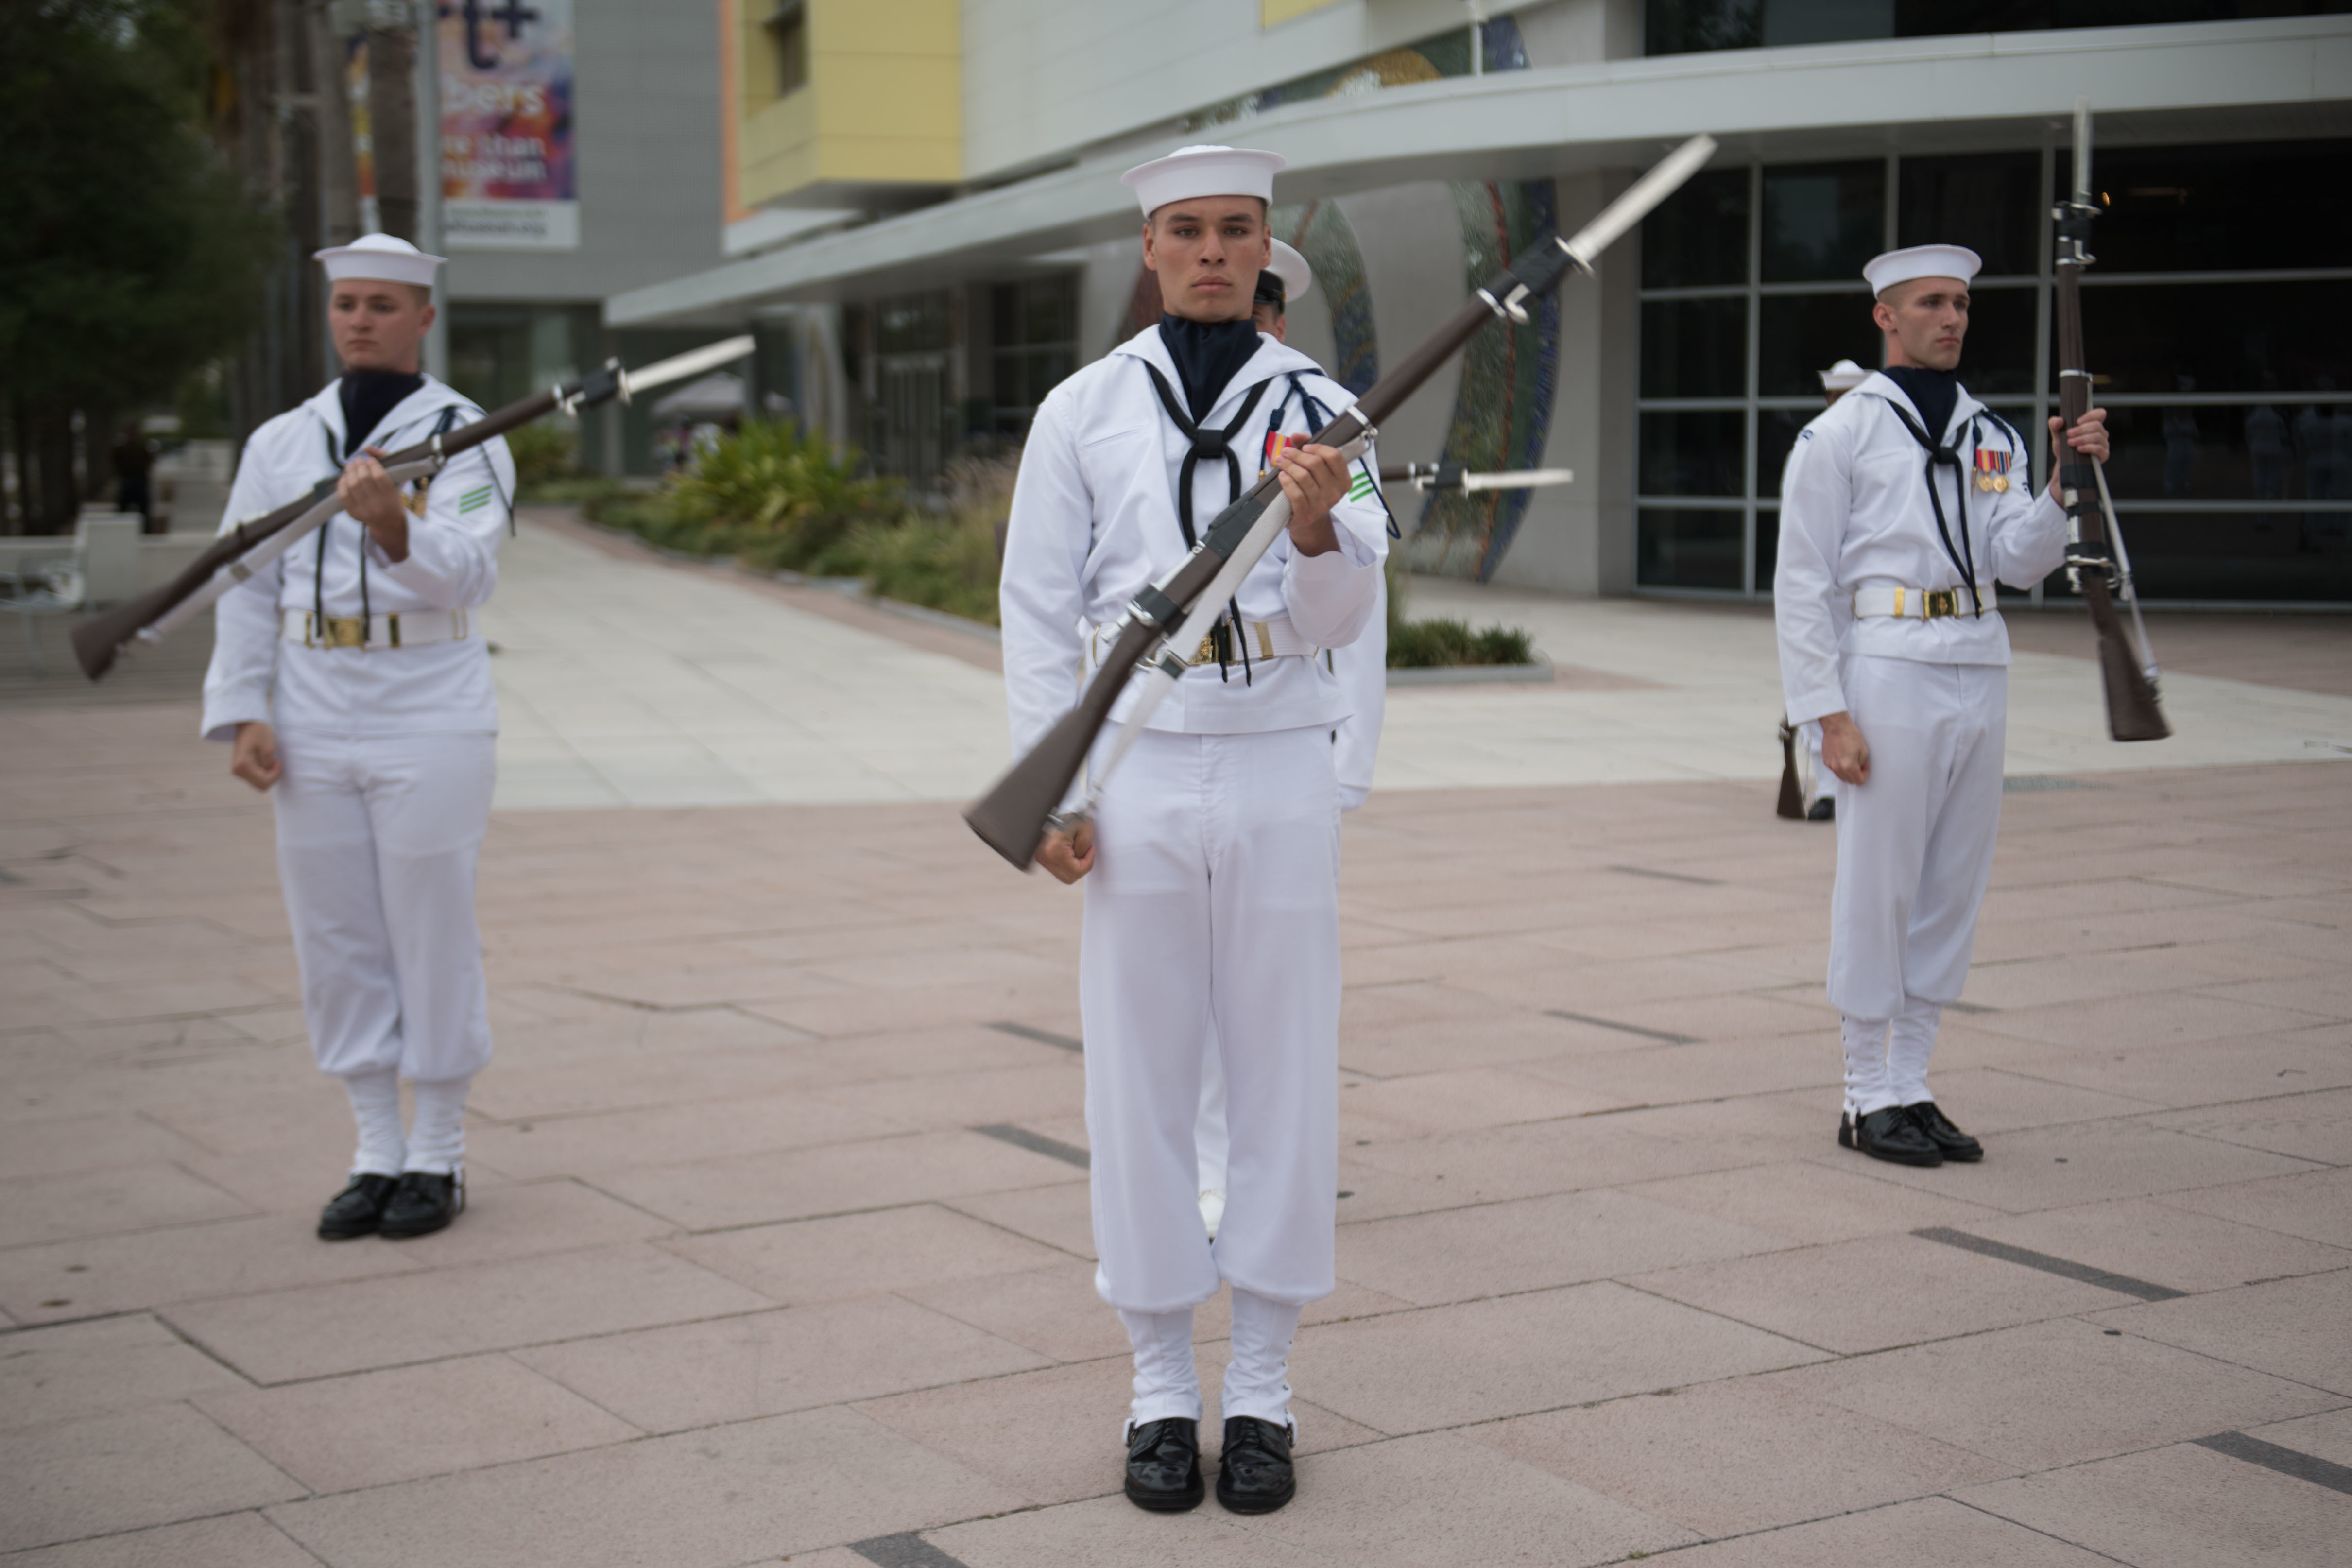 The U.S. Navy Ceremonial Guard drill team performs at the Glazer Children’s Museum in support of Tampa Bay Navy Week.